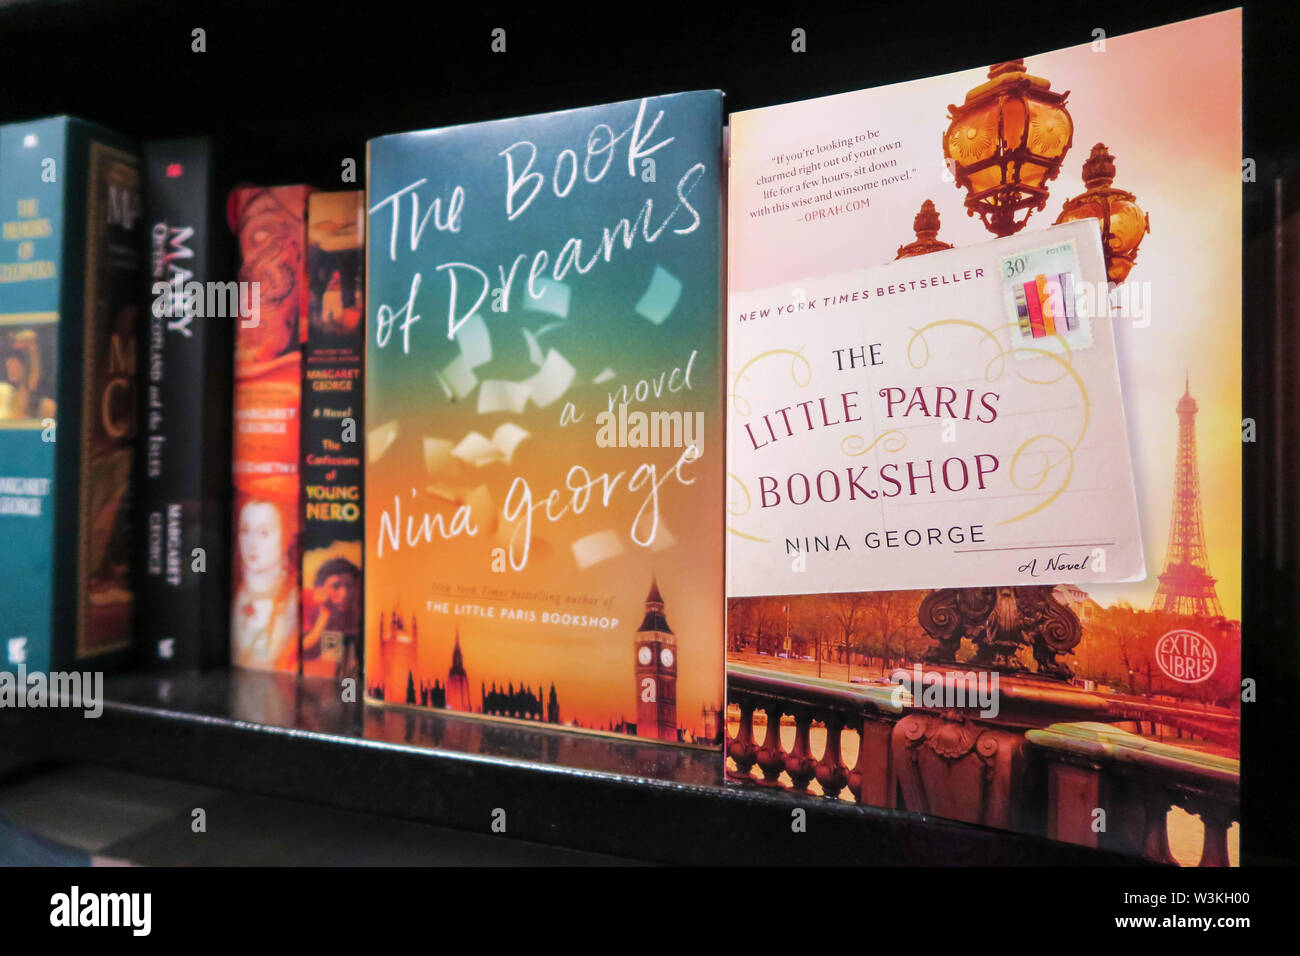 Barnes & Noble Booksellers Book Display, NYC, USA Stock Photo